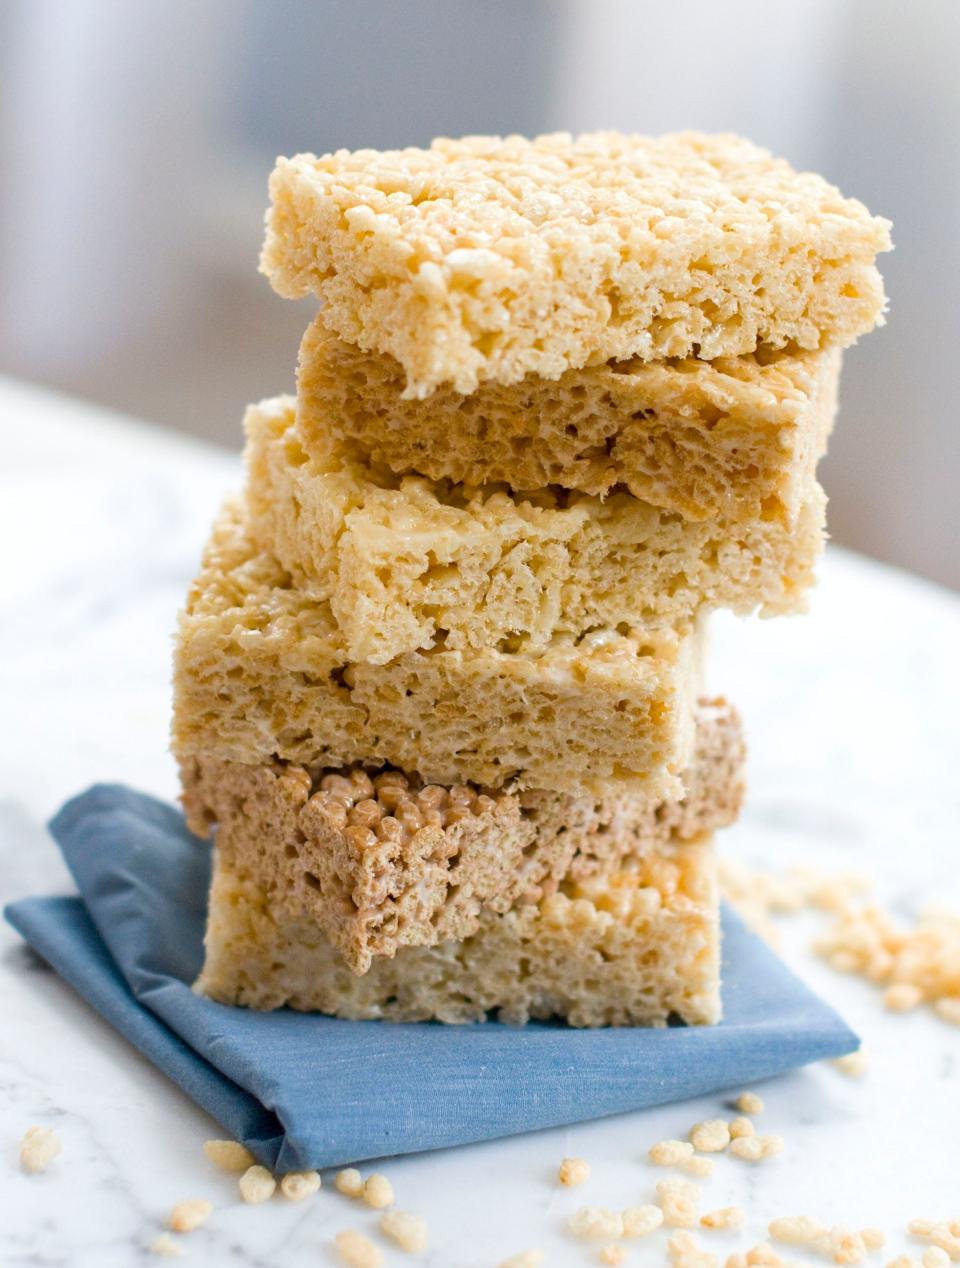 National Snack Day is March 4 and Rice Krispies Treats are the favorite snack of Michiganders.